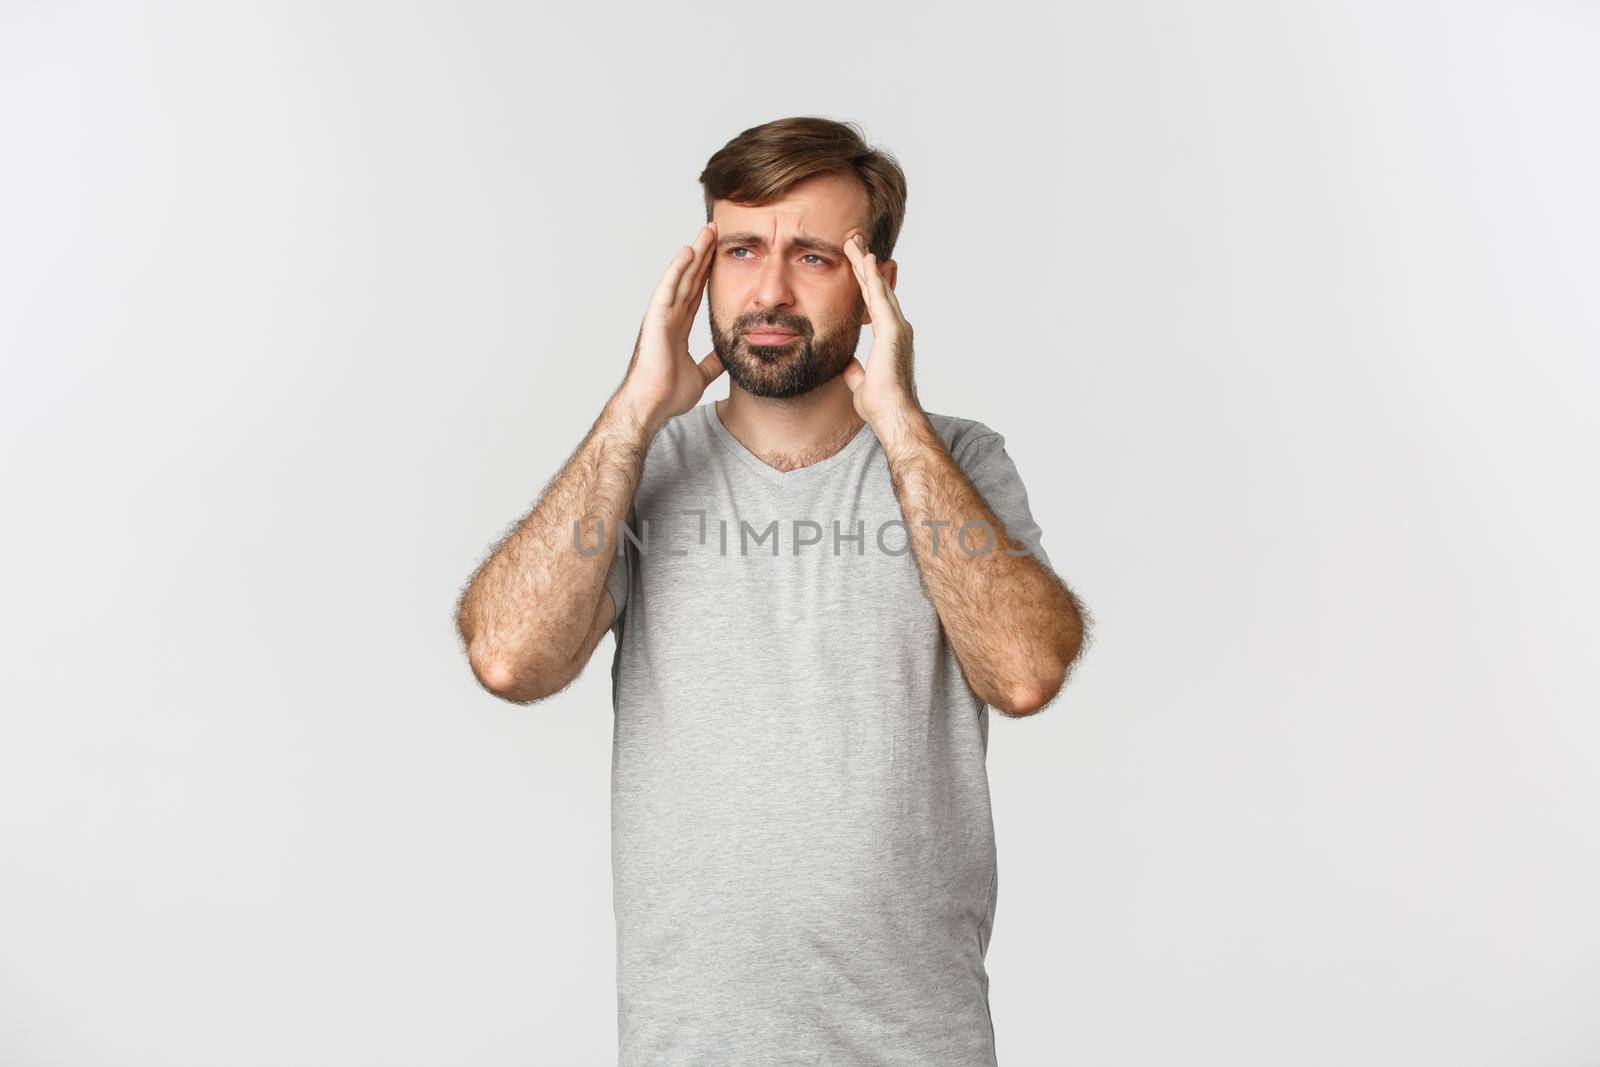 Man having a severe headache, grimacing and touching head, feeling dizzy or sick, standing in gray t-shirt over white background.